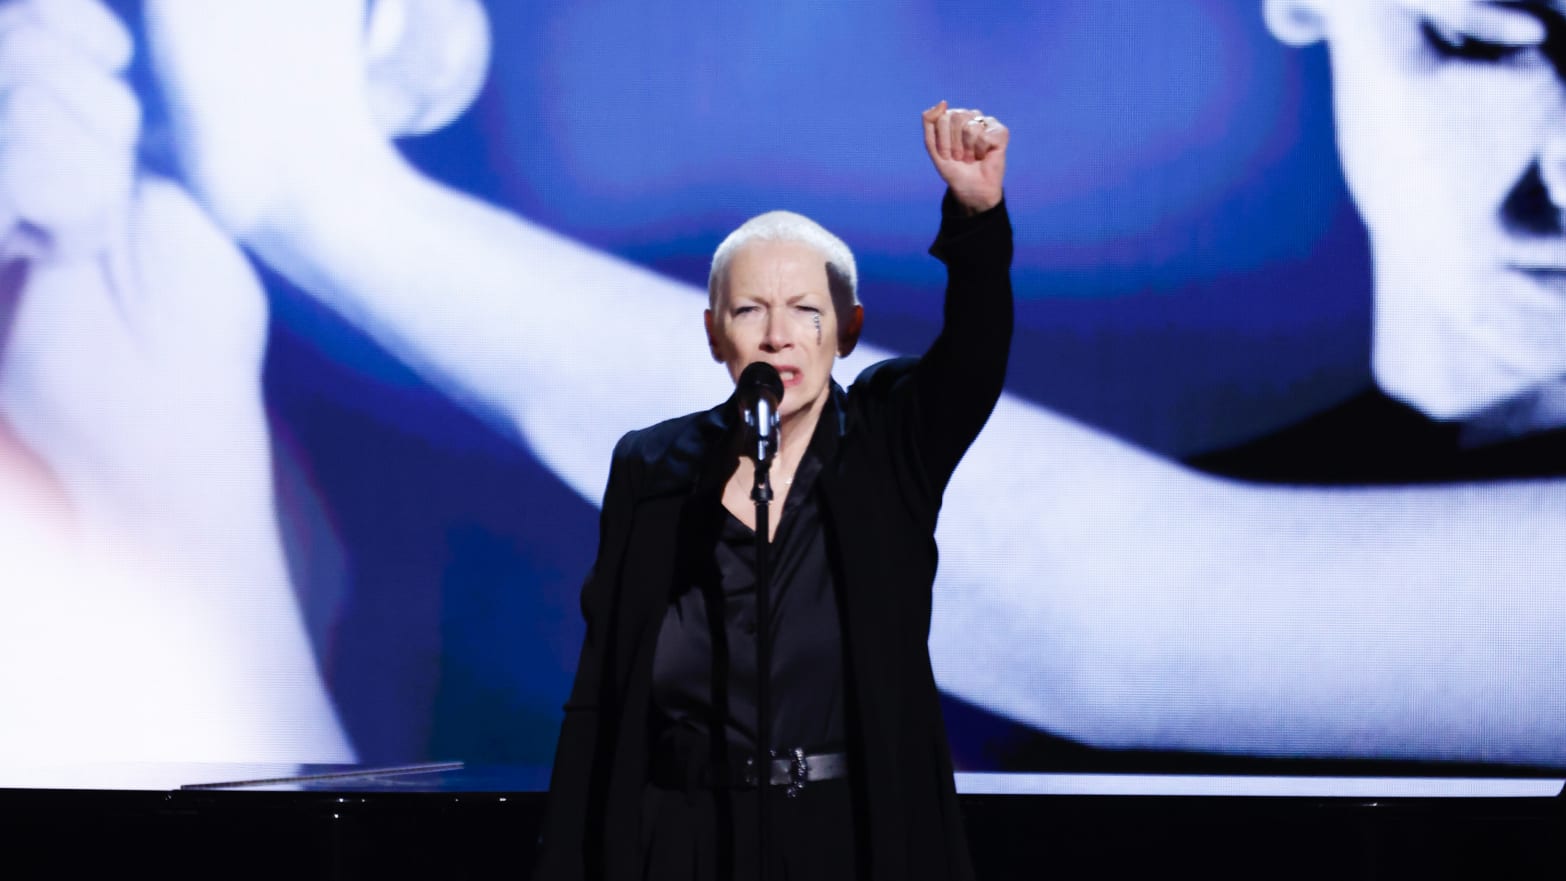 Annie Lennox remembering Sinead O’Connor at the Grammy Awards.